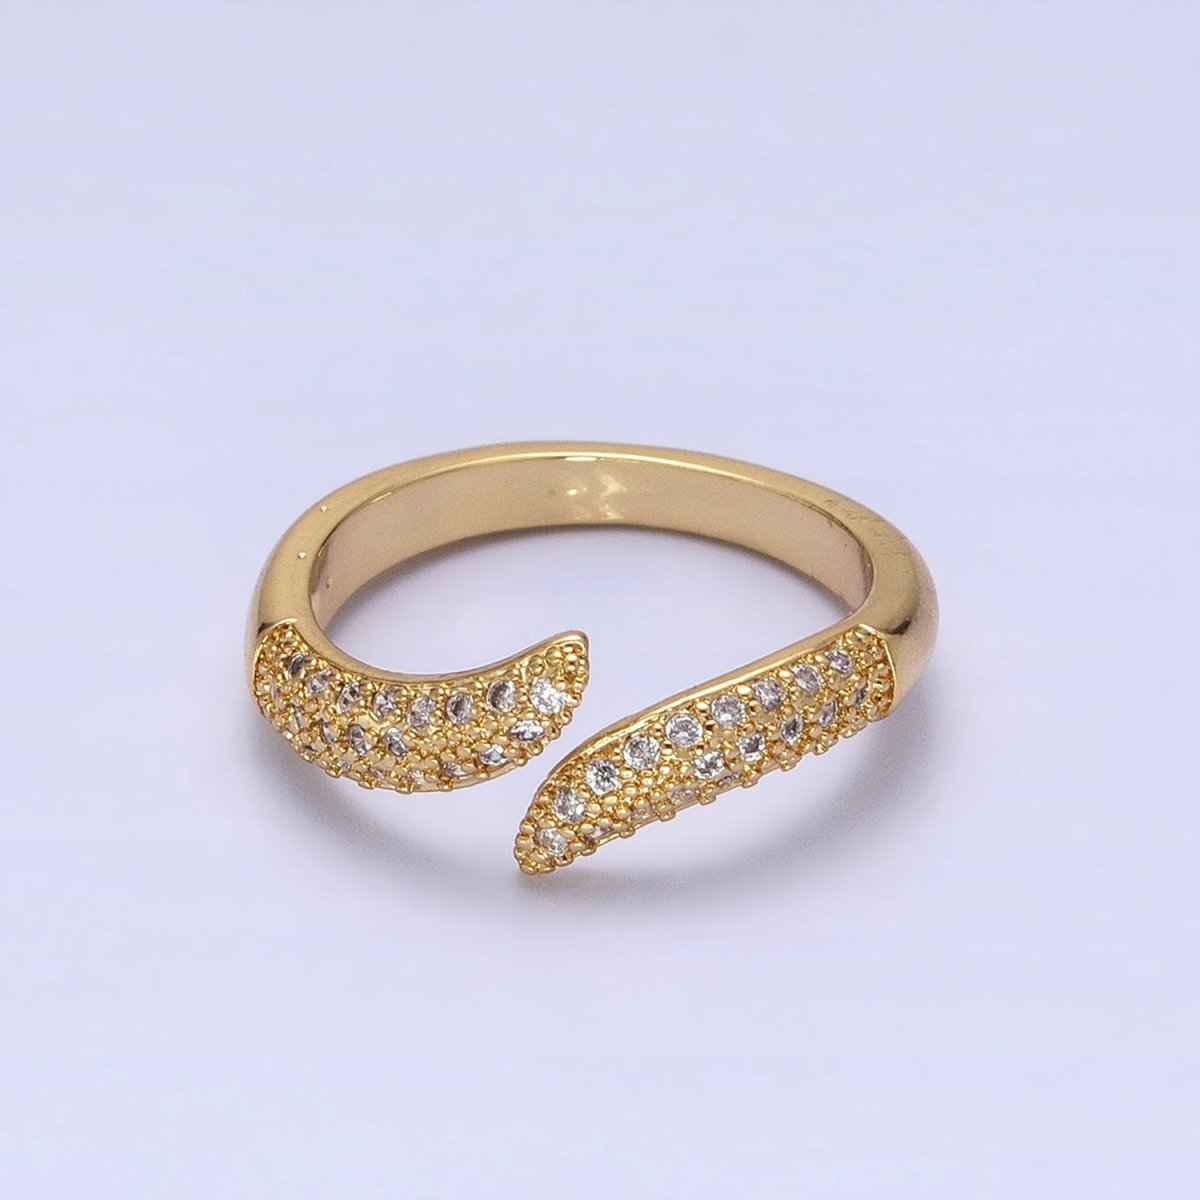 Gold Filled Micro Pave Wrap Ring | Unique Wedding Band | Statement Stacking Band Wrap Spiral Ring Adjustable O1515 O1516 - DLUXCA